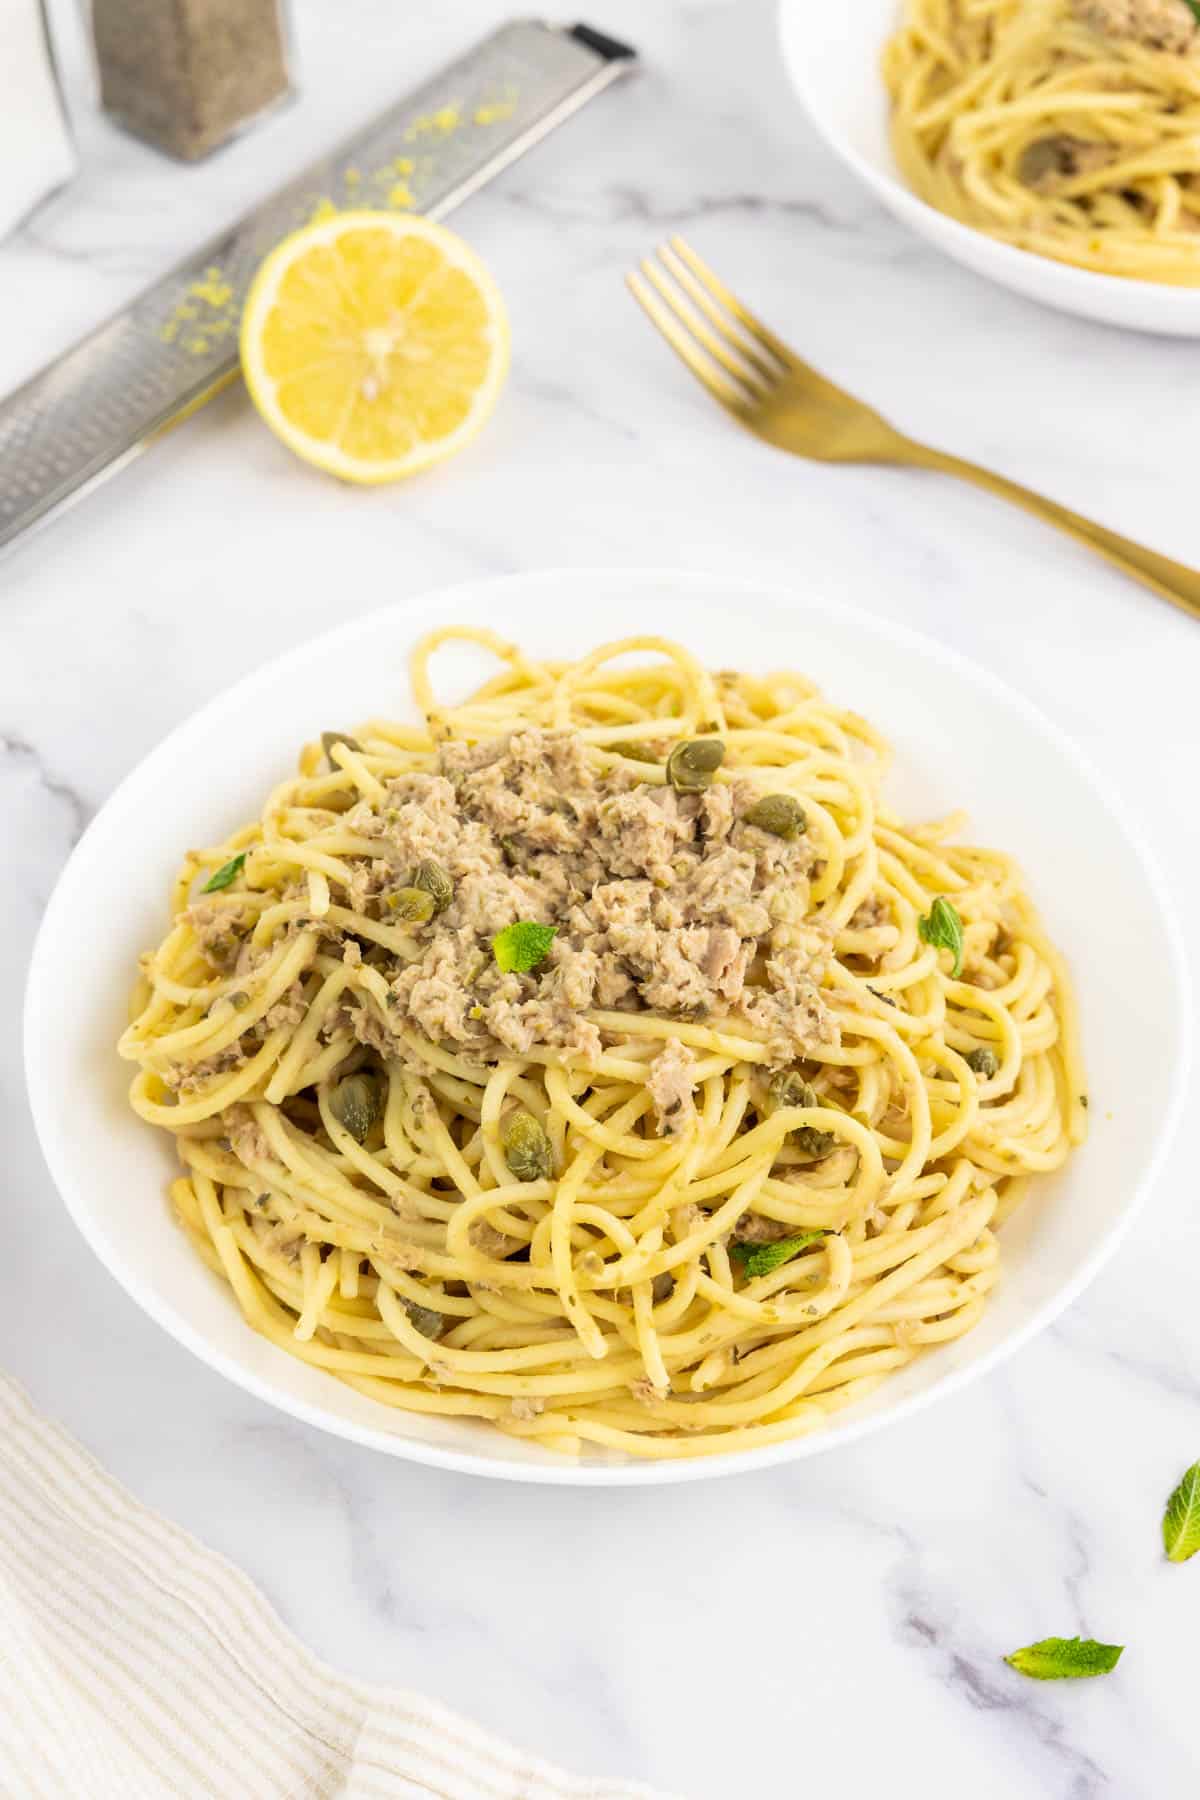 Two bowls of canned tuna with spaghetti